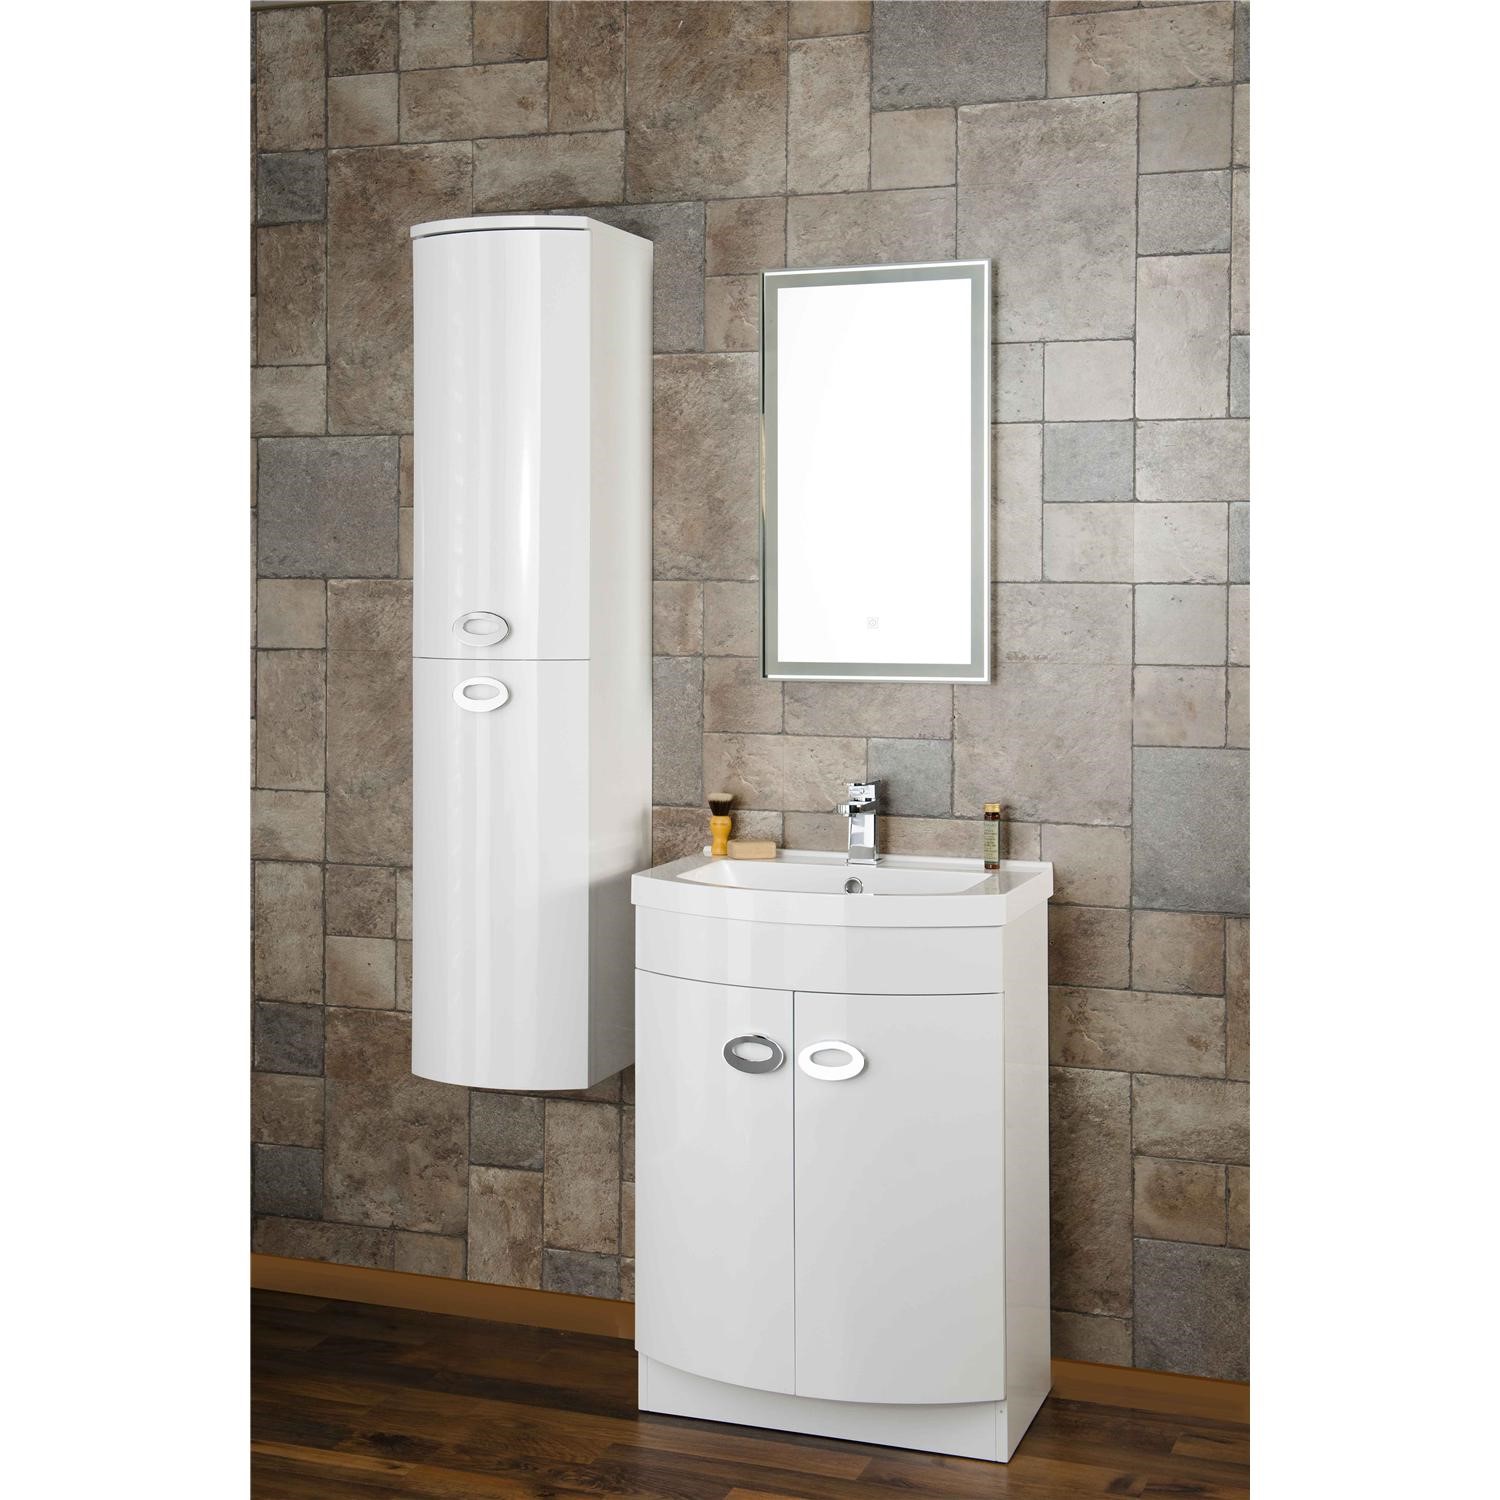 Curved White Wall Hung Tall Bathroom Storage Cabinet W320 X